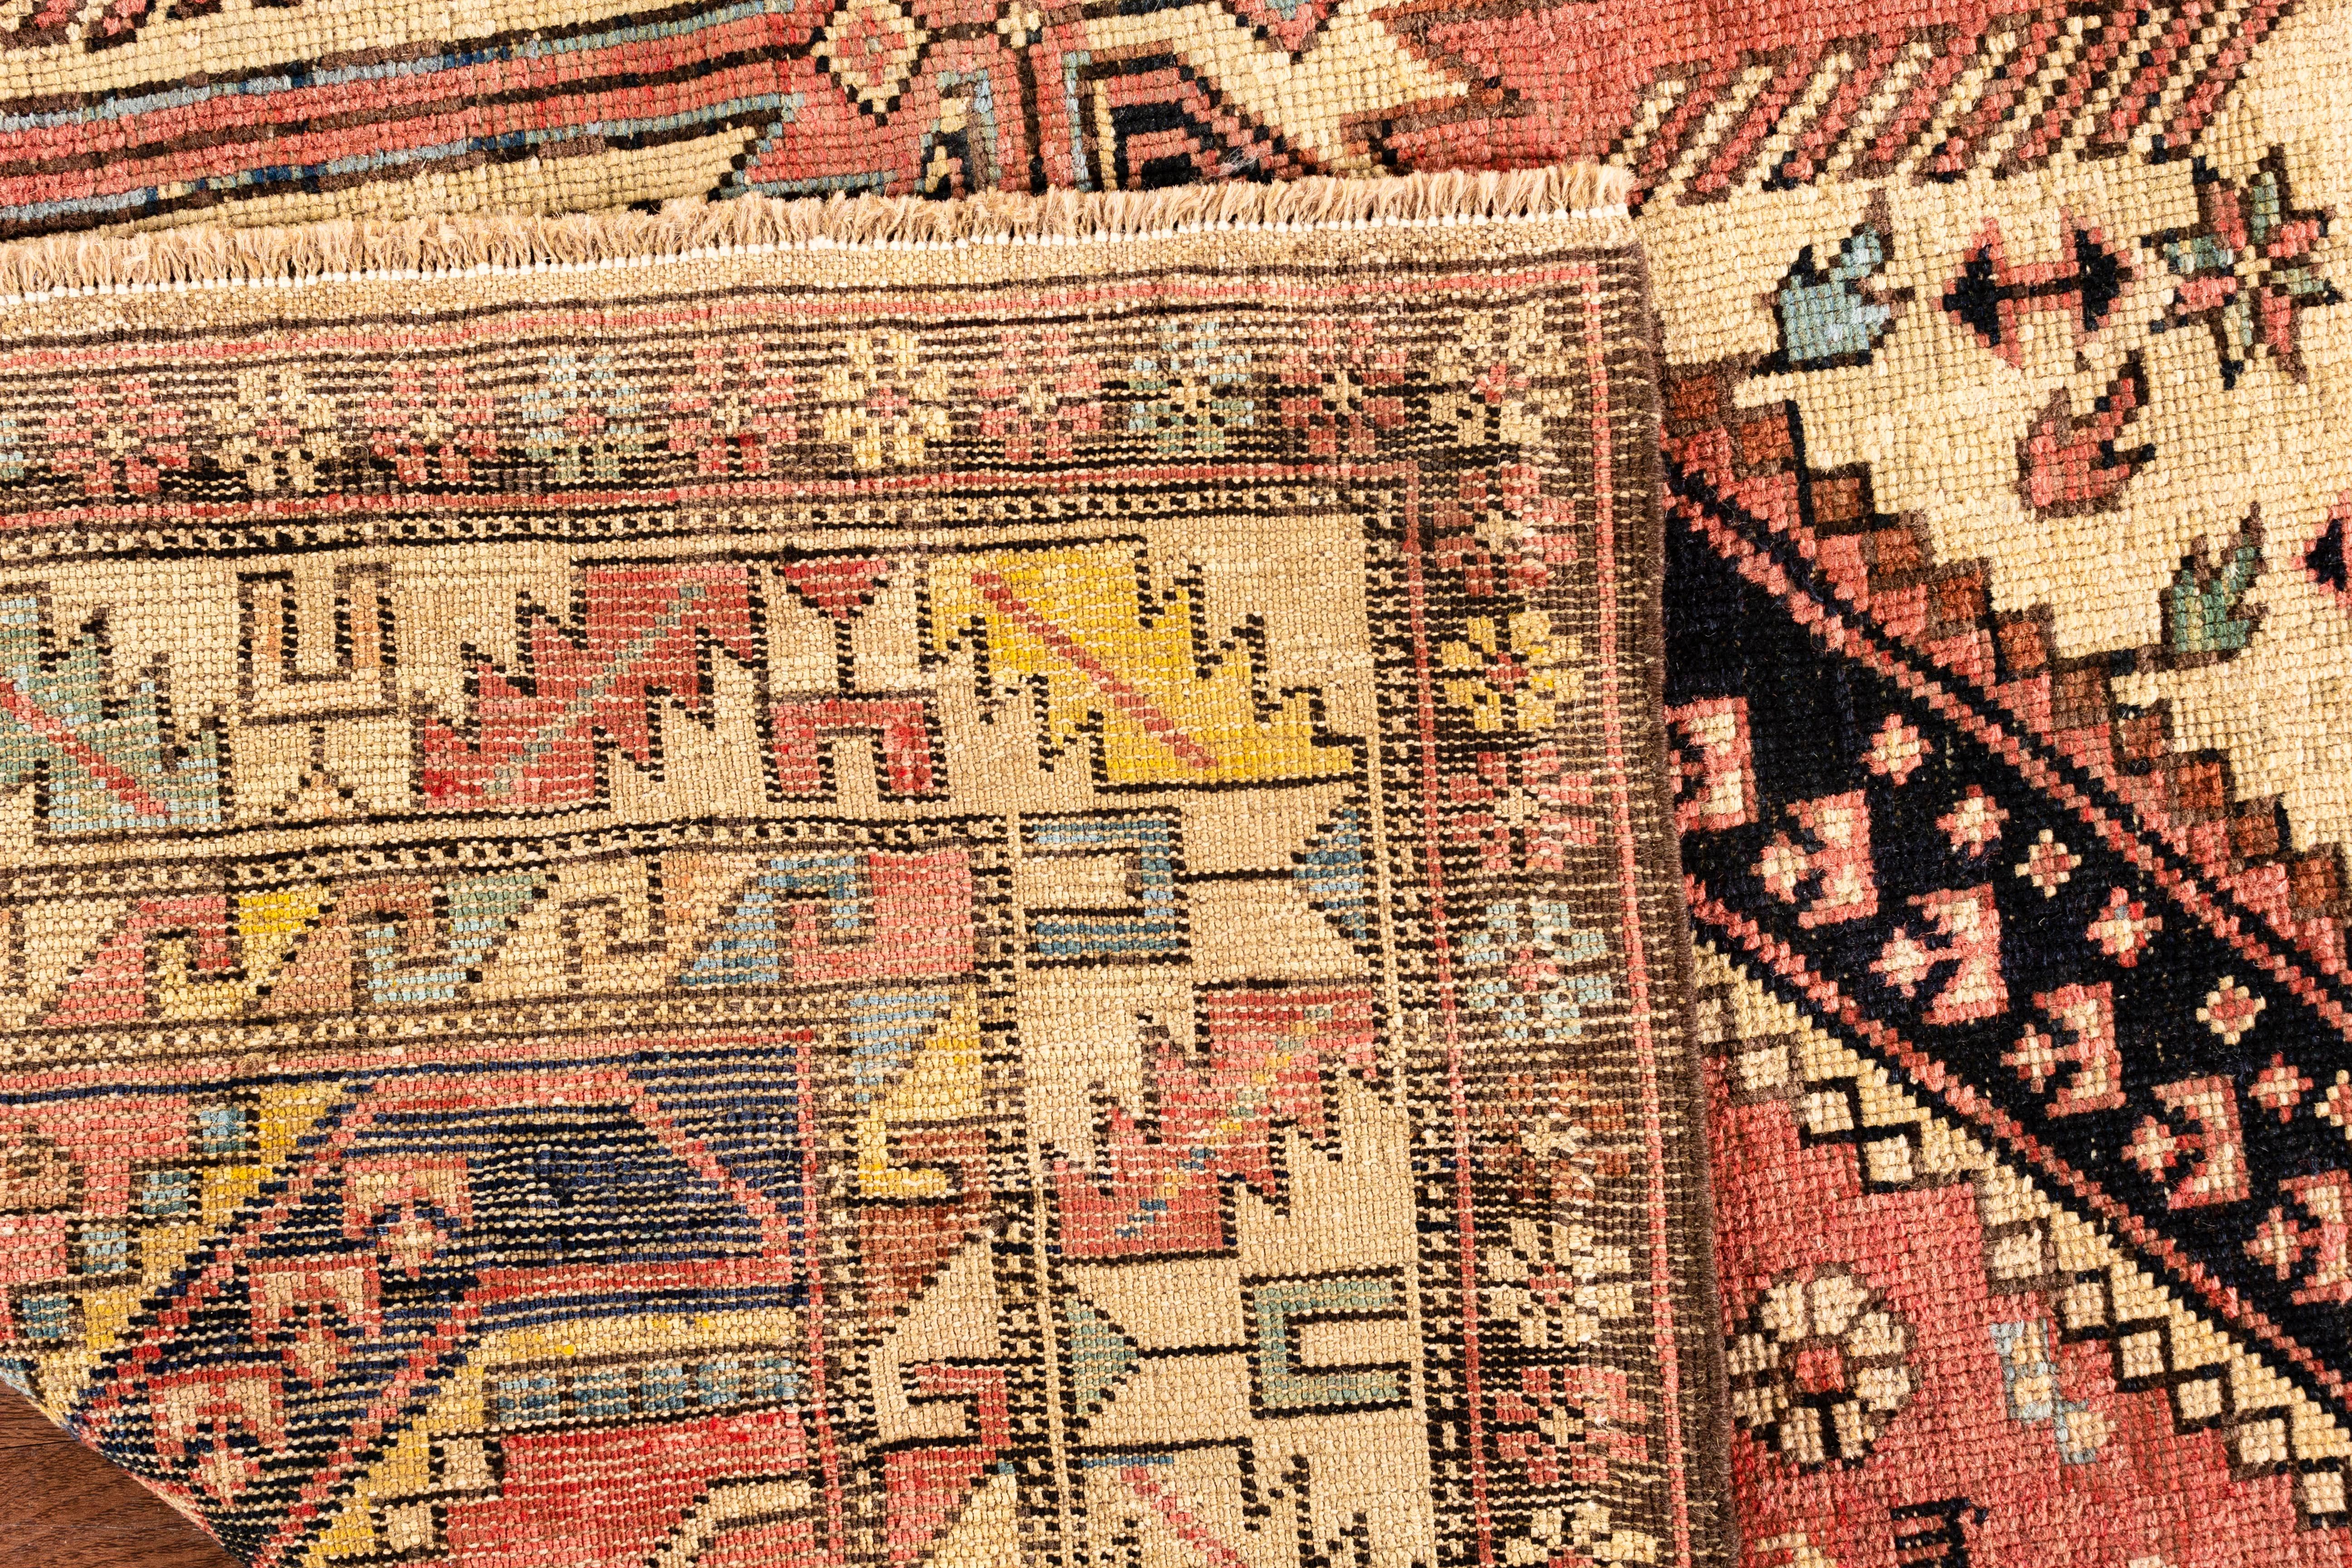 Antique Caucasian Shirvan rug, circa 1880. From east Caucasia a Shirvan in a squarish size handwoven circa 1880, with a soft gentle field complemented so well by the dark diamond bands surrounded by a light ivory border enclosed within a light and